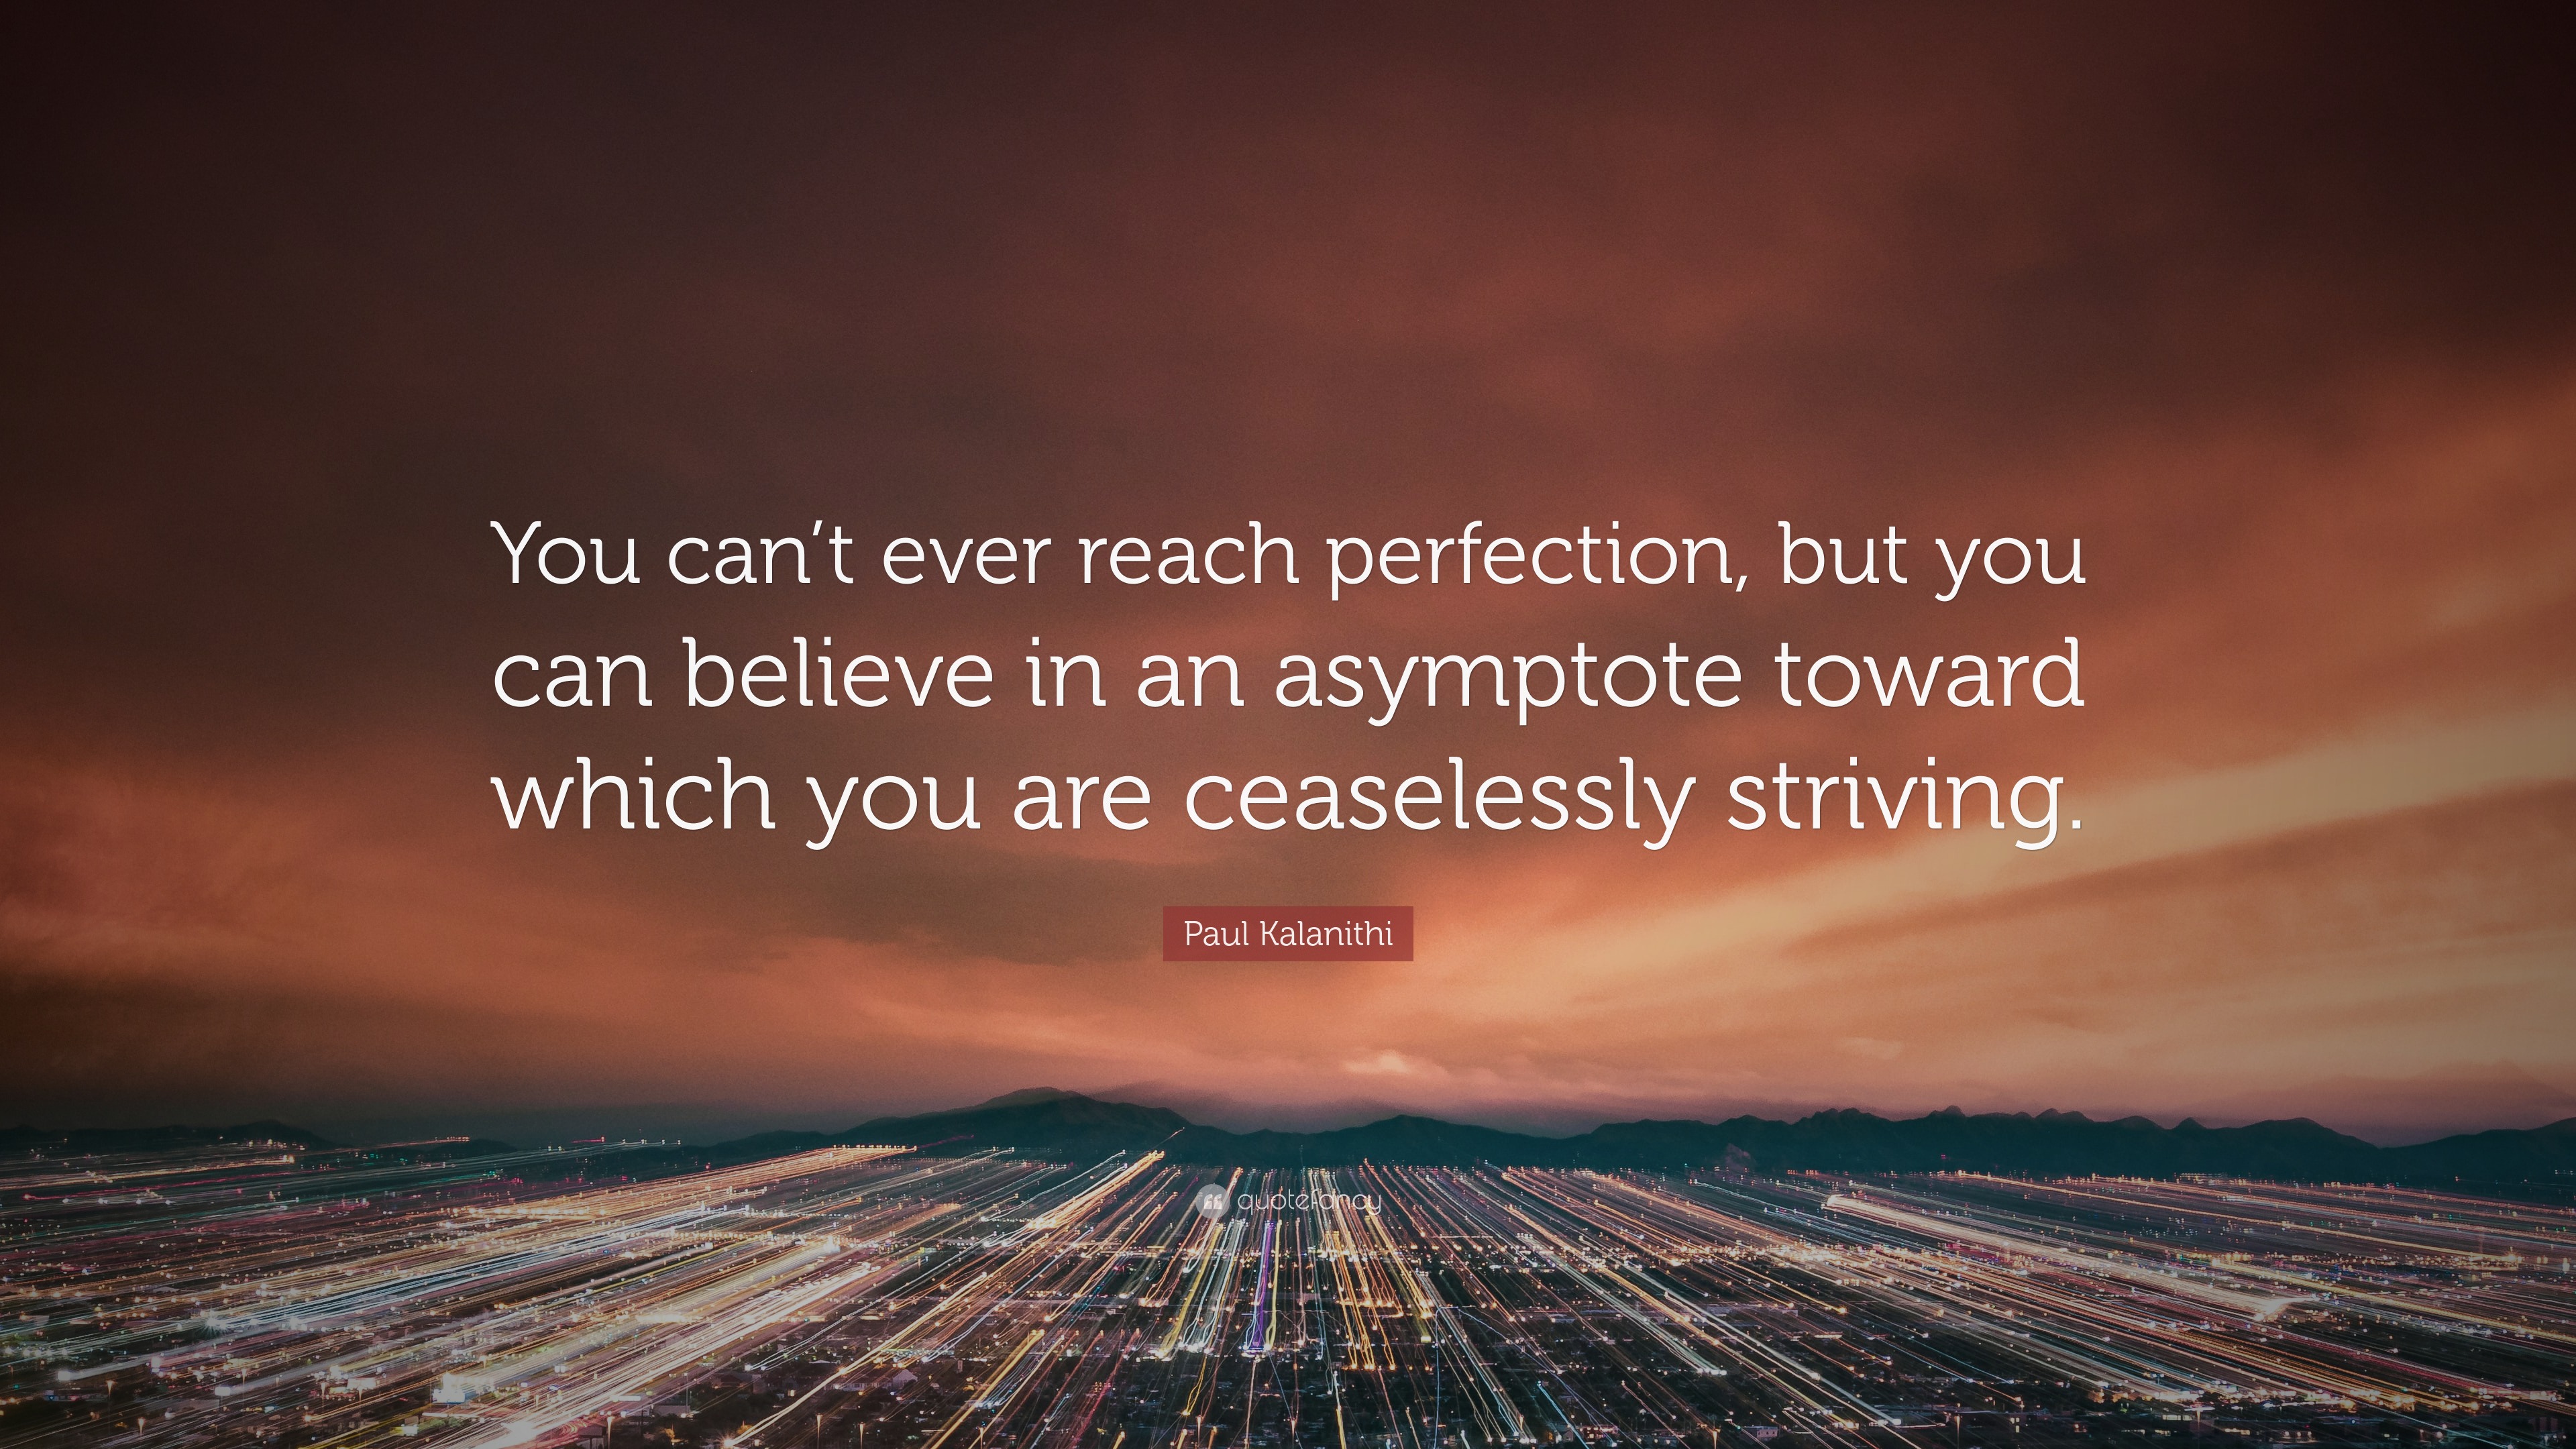 Paul Kalanithi Quote: “You can’t ever reach perfection, but you can